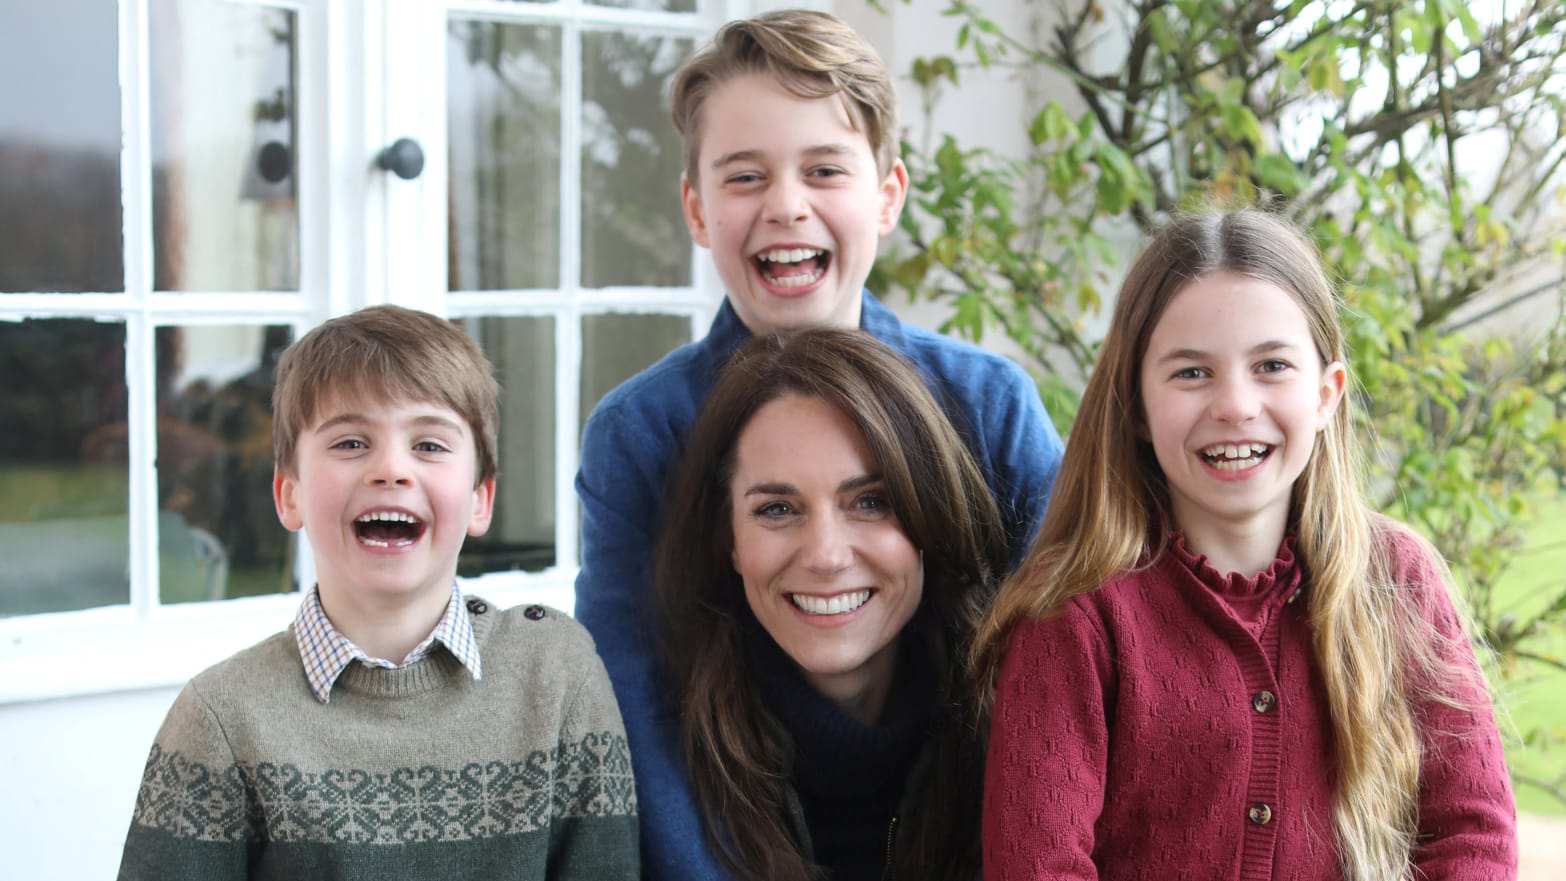 A photo released by Kensington Palace of Princess Kate Middleton surrounded by her children.